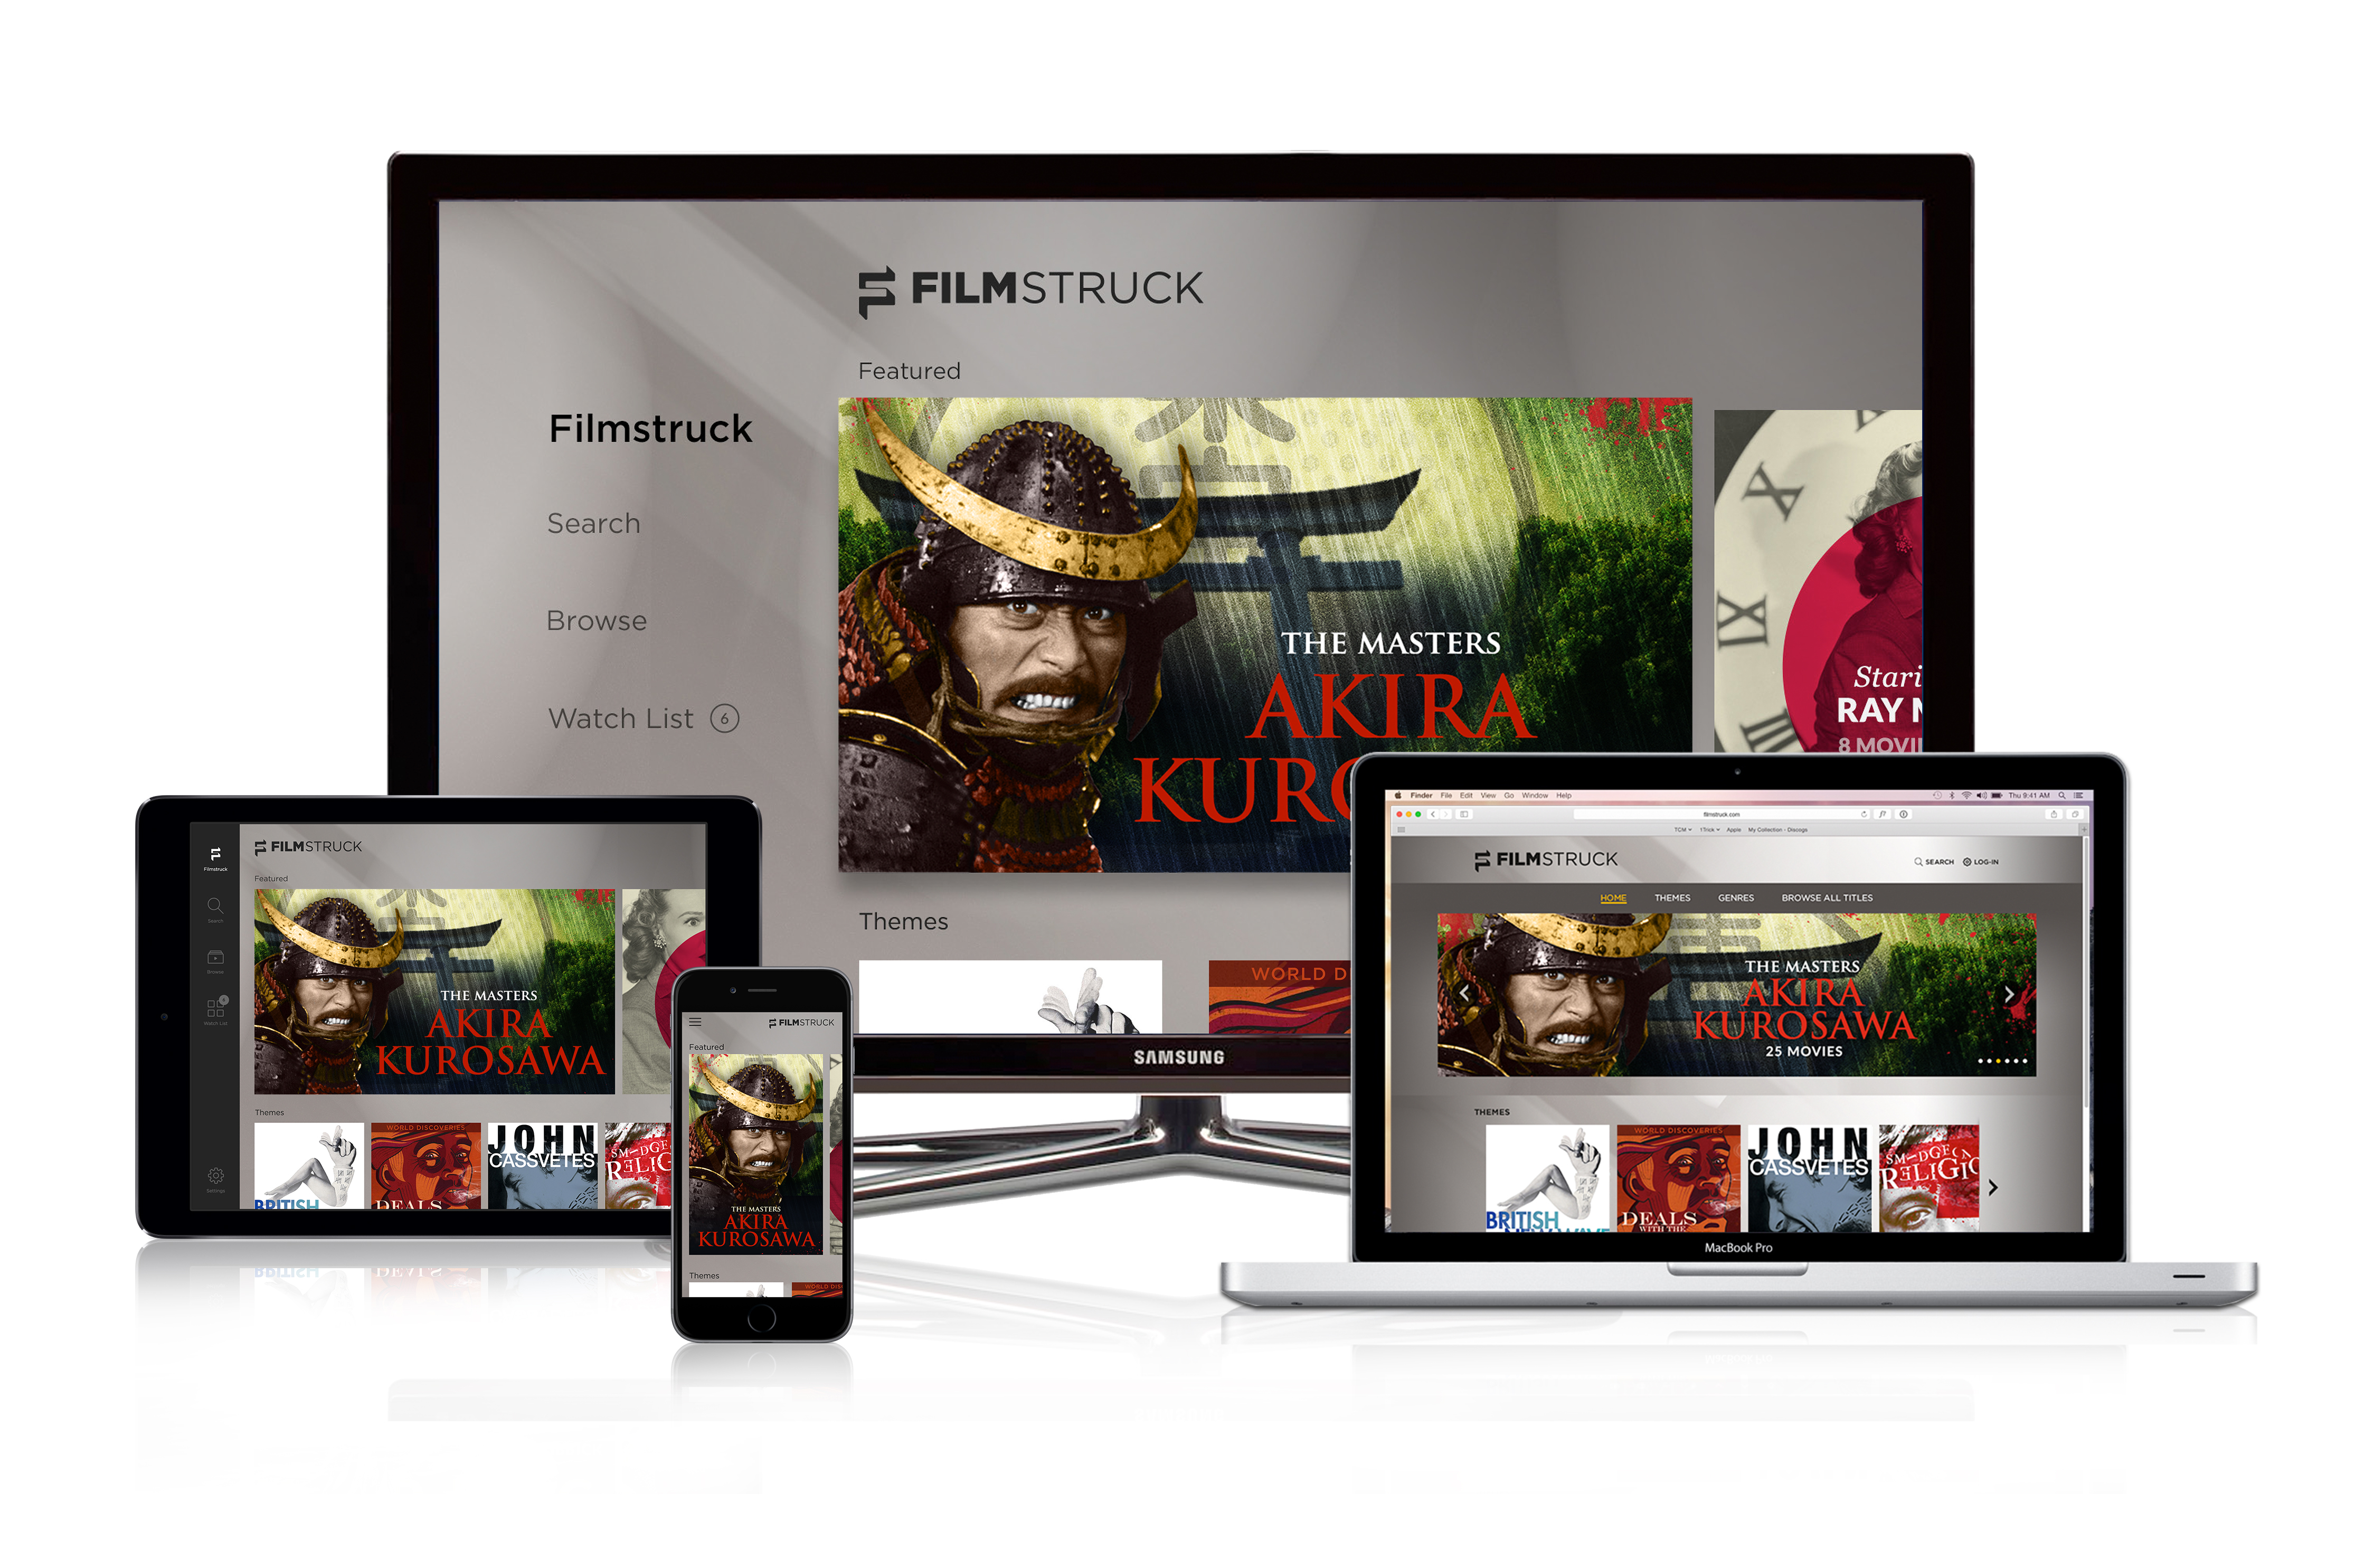 Filmstruck, a new collaboration between Turner Classic Movies and the Criterion Channel.